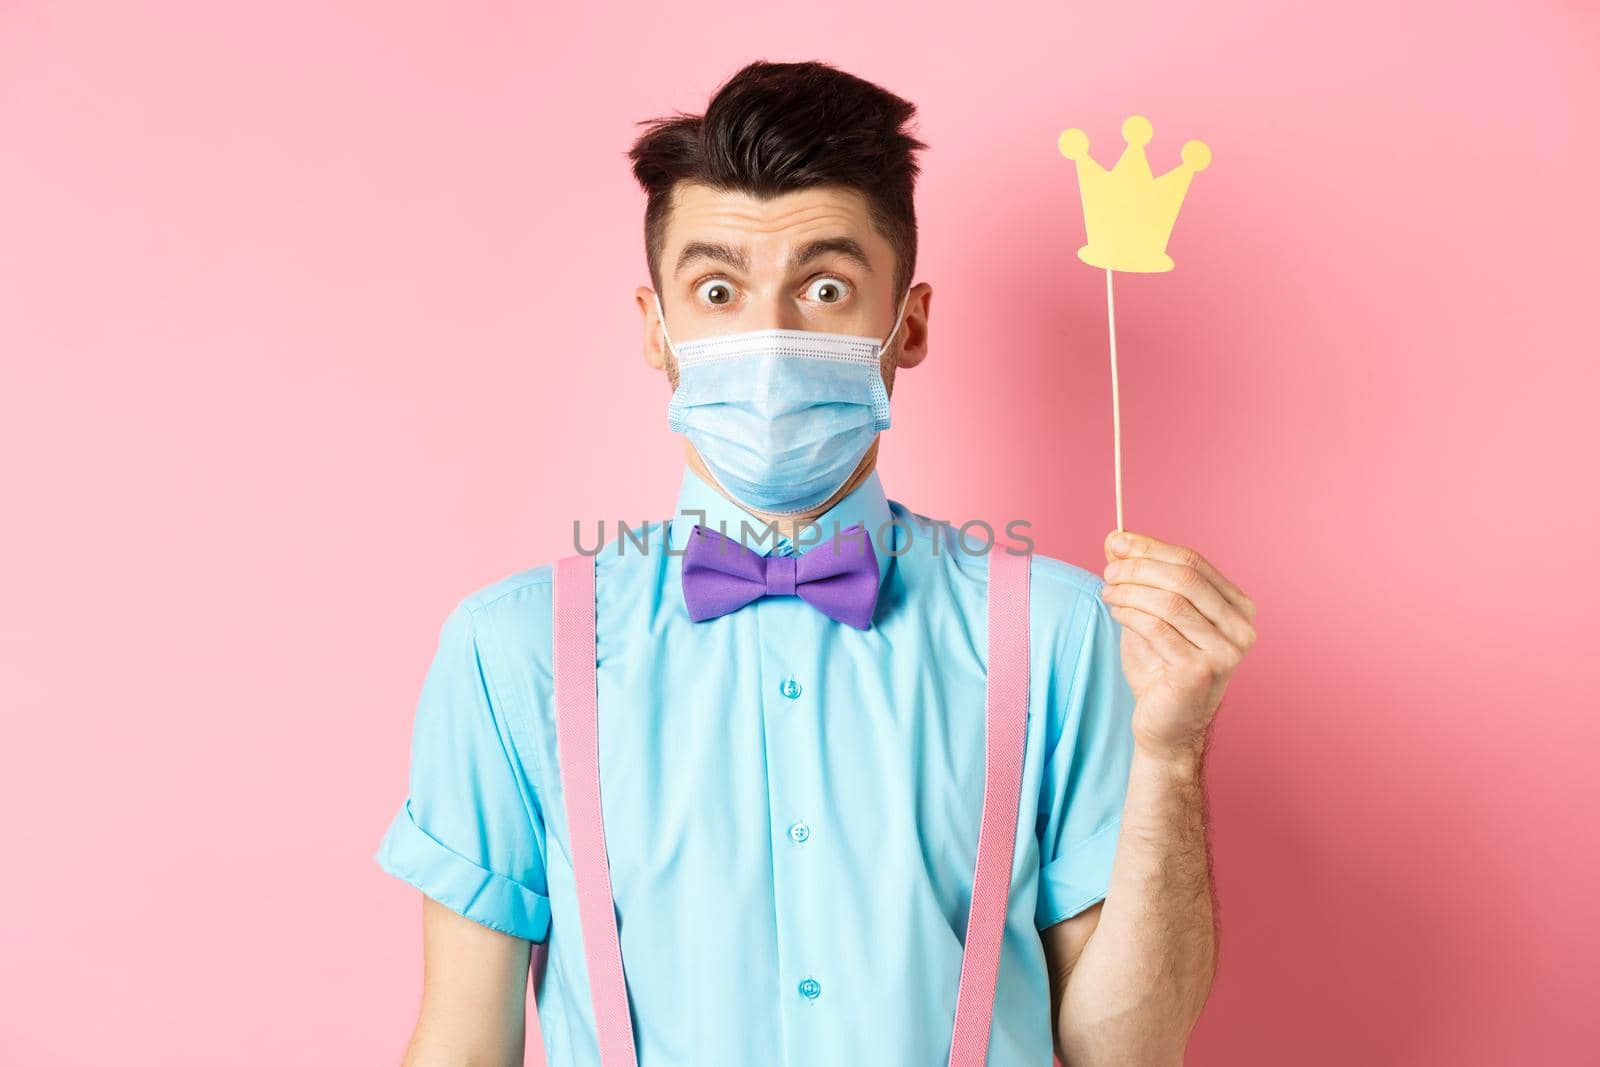 Covid, pandemic and quarantine concept. Cute and silly guy in medical mask looking surprised, holding small crown for party, standing over pink background.